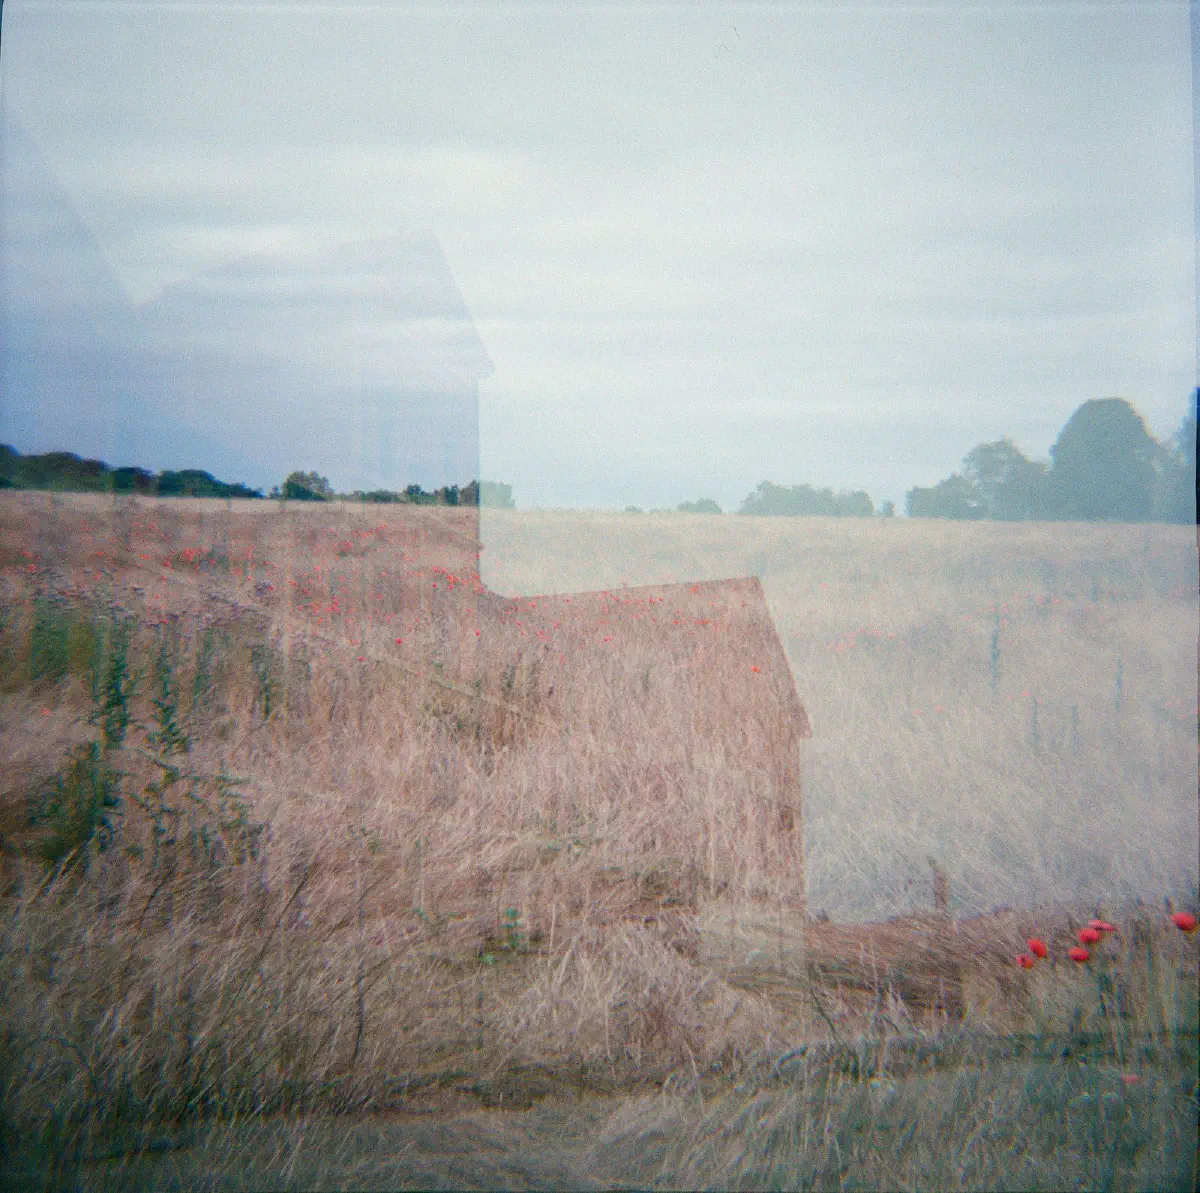 Double exposure picture of a field and the Camp des Milles